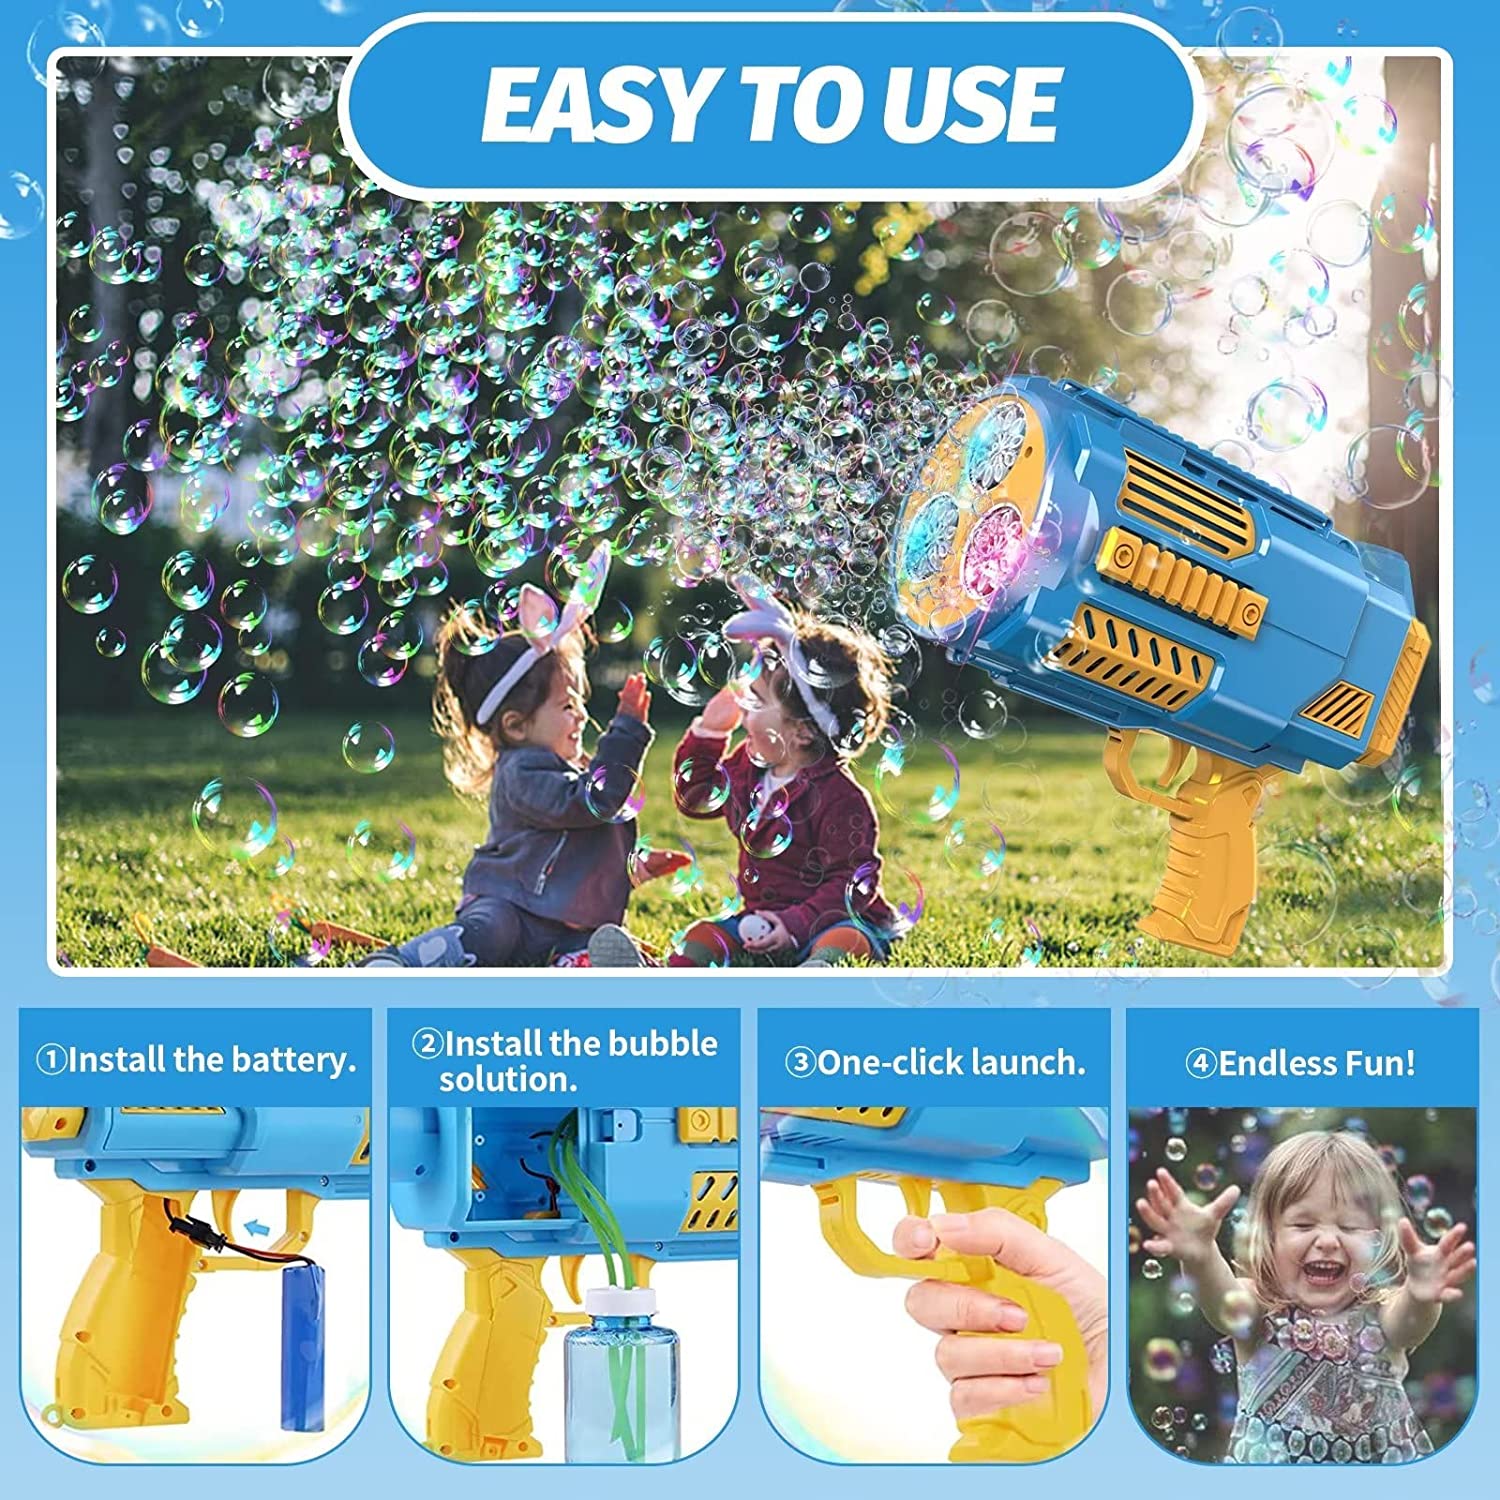 Bubble Machine Automatic Bubble Gun with Colorful Lights and Thousands Bubbles, Bubbles Kids Toys for Girls Boys 3 4 5 6 7 8 9 10 11 12 Years Old Fun Outdoor Gifts